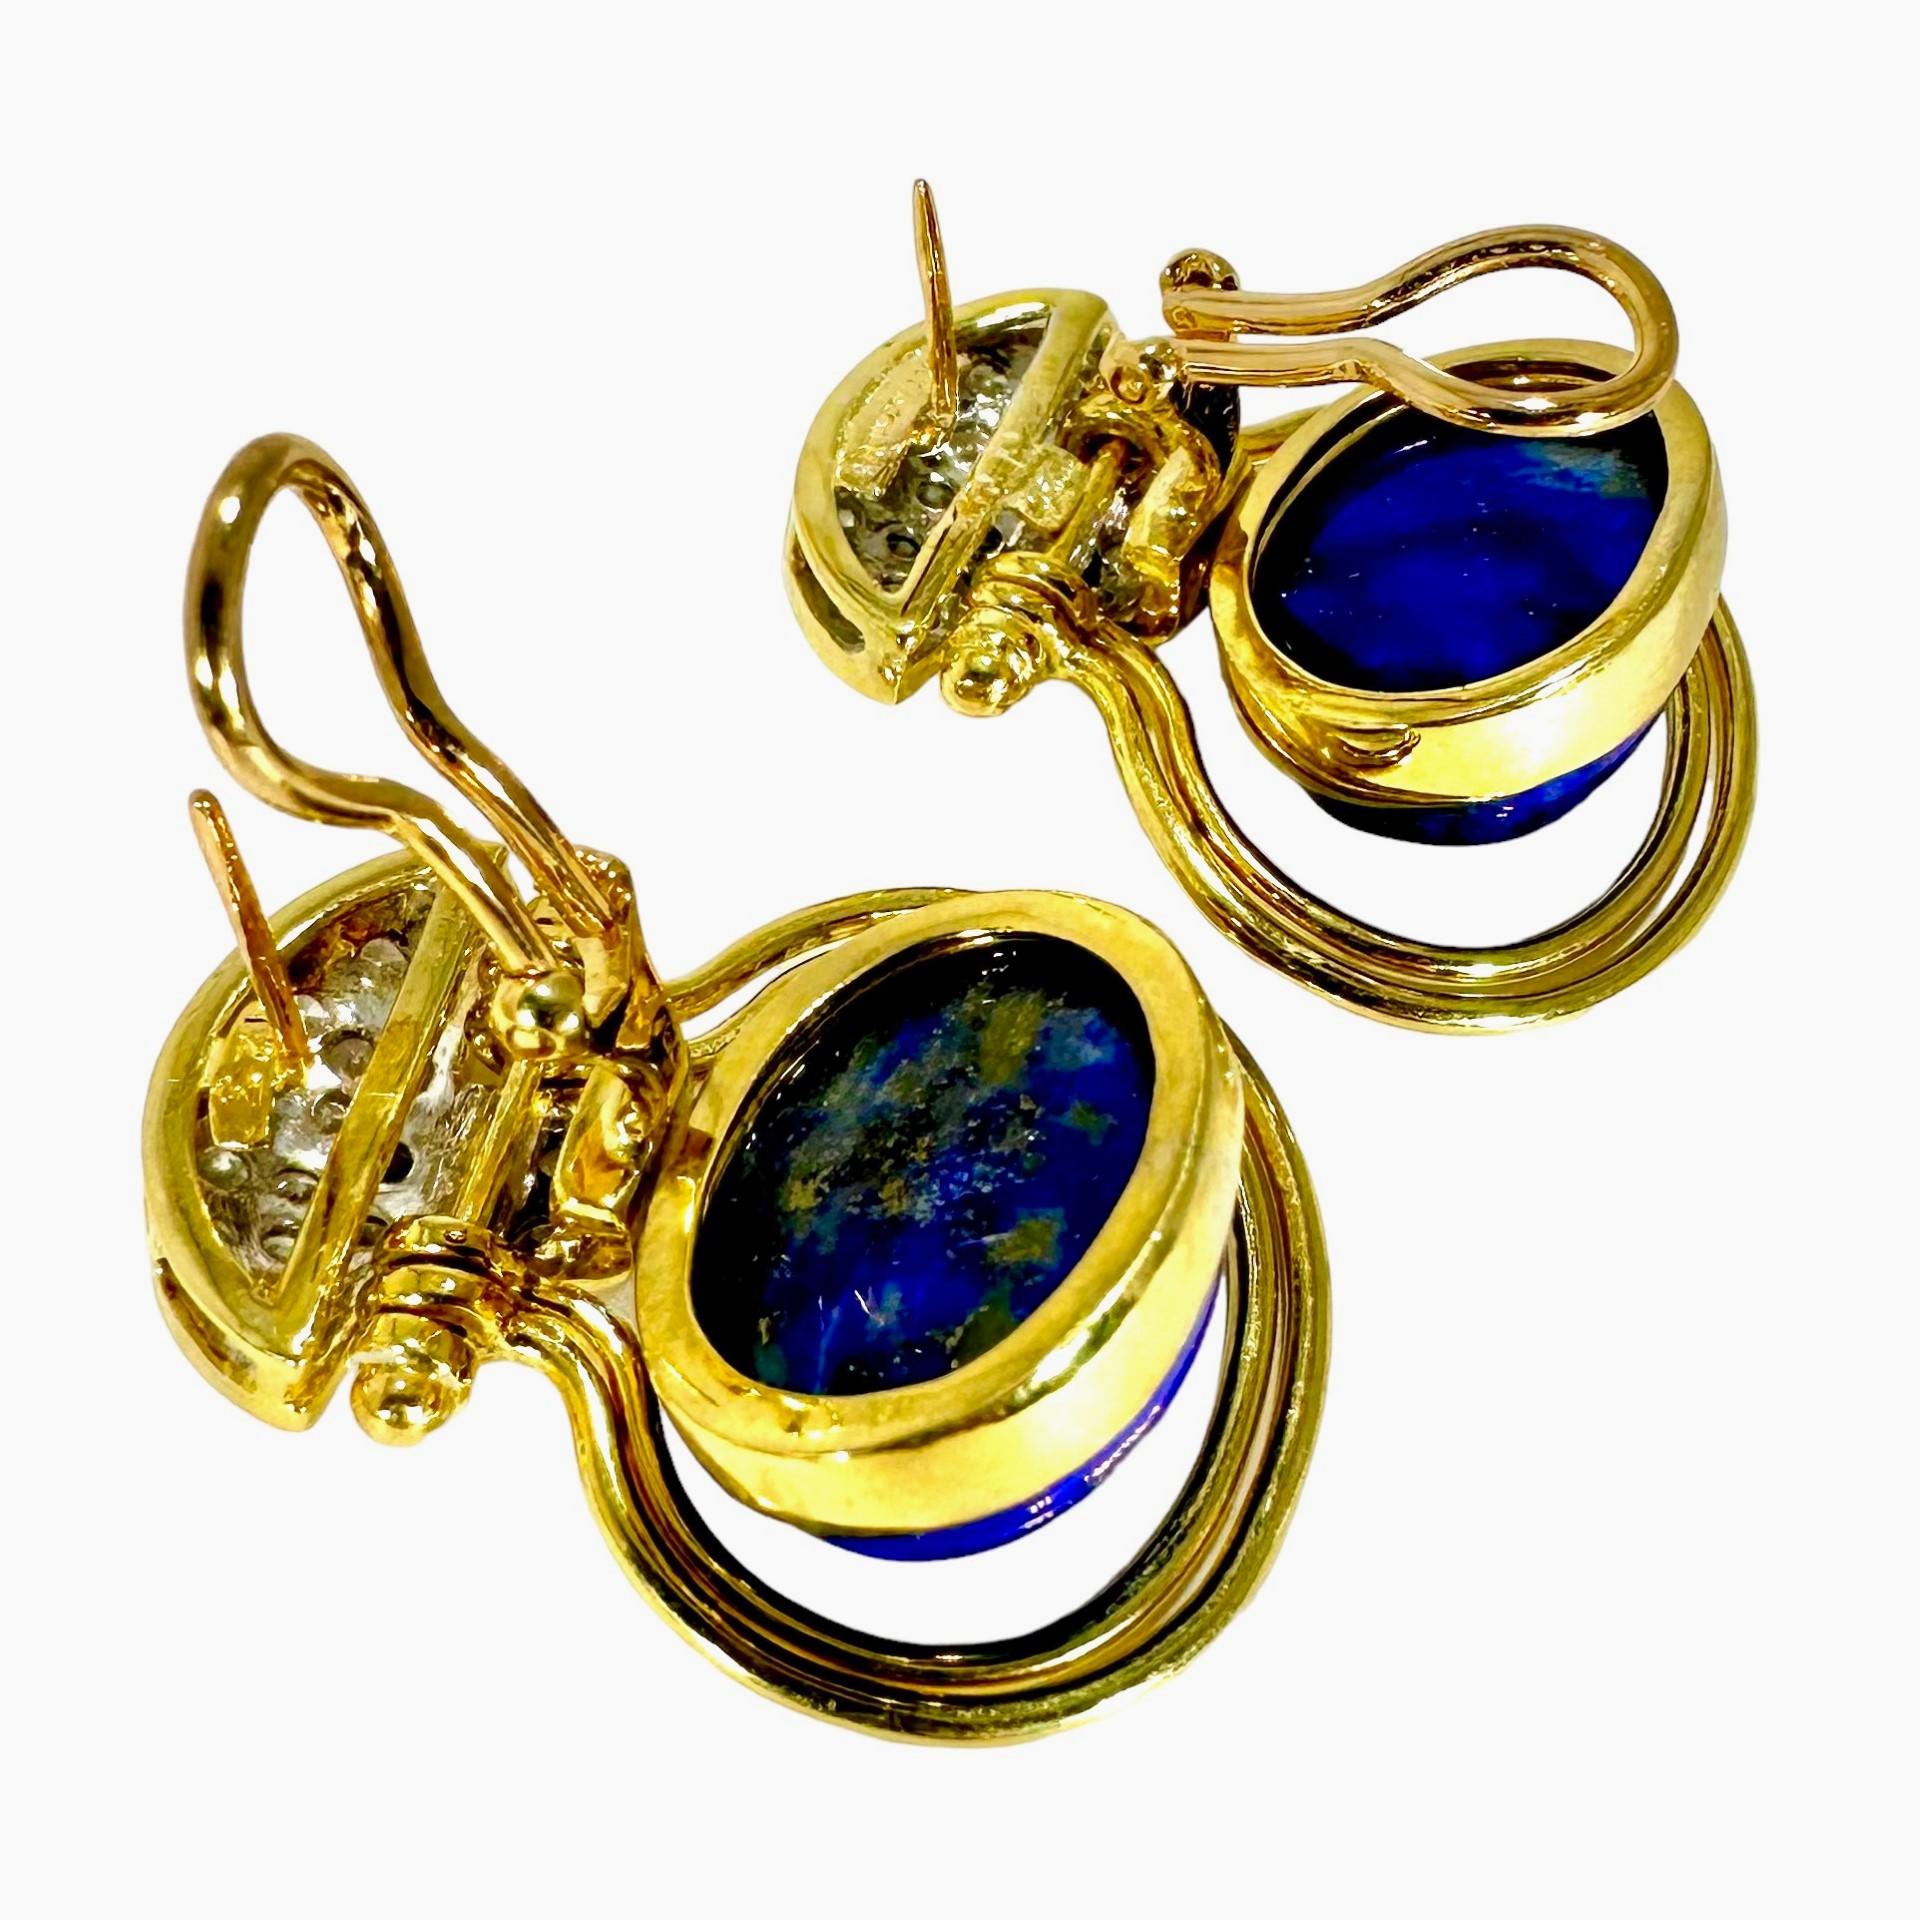 Brilliant Cut Vintage, Tailored, 18k Yellow Gold, Diamond and Lapis Lazuli Hanging Earrings For Sale